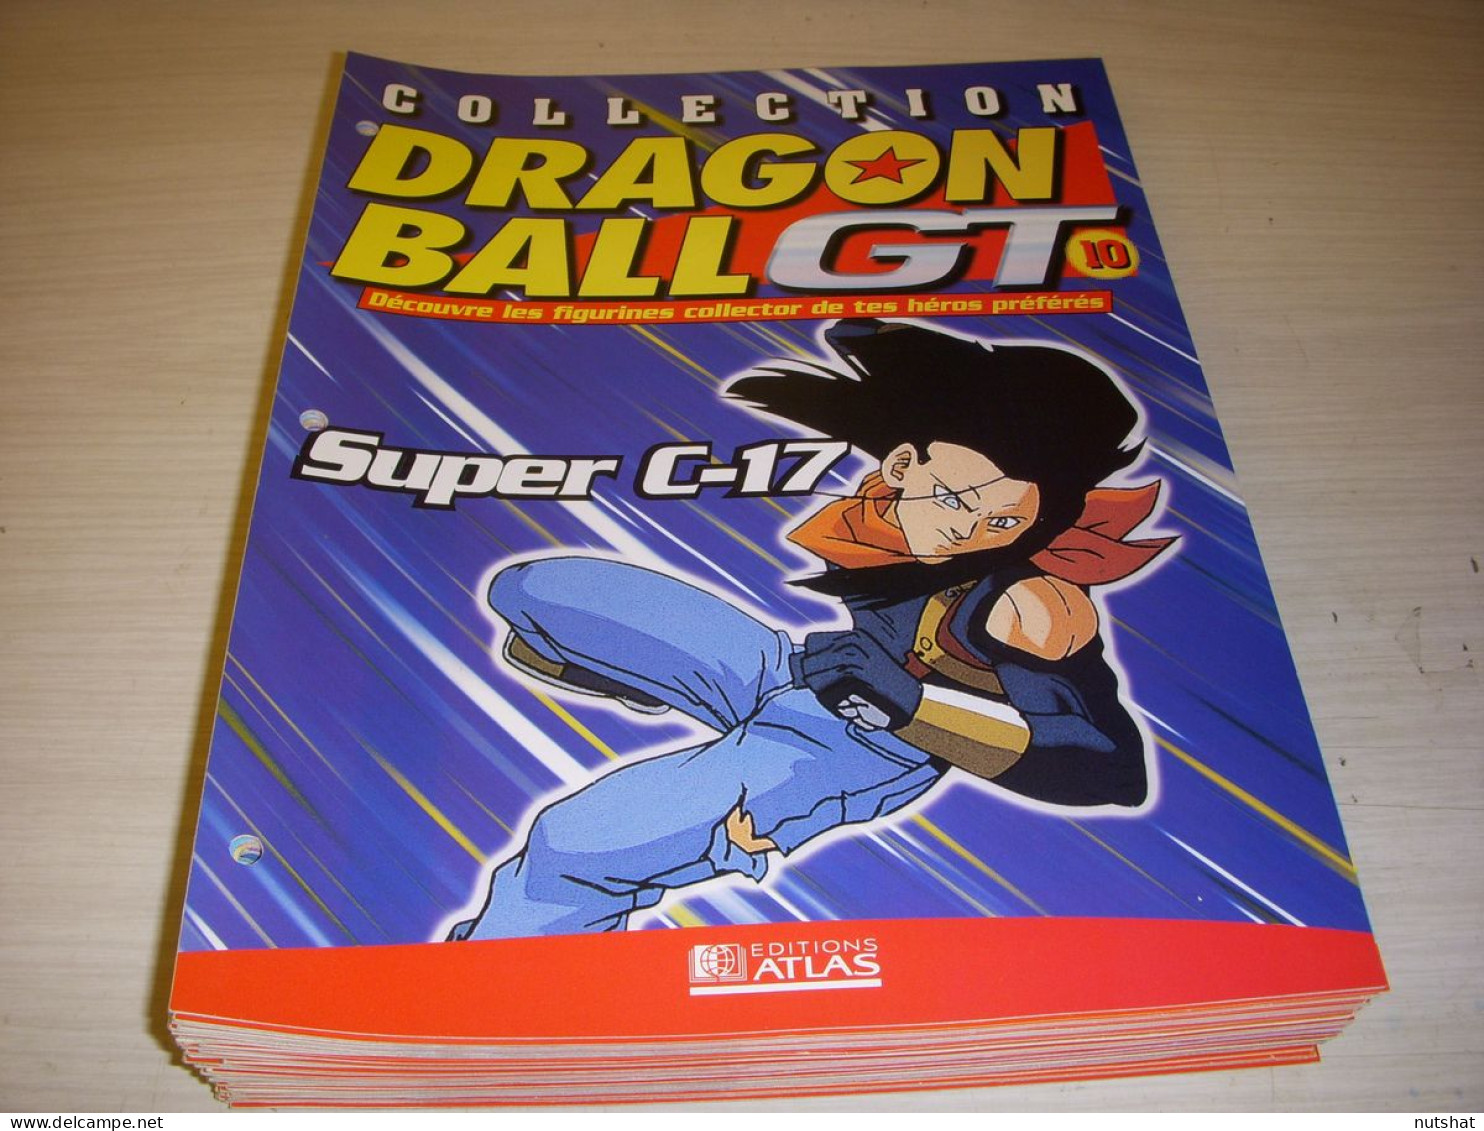 COLLECTION DRAGON BALL 10 SUPER C-17 HERCULE BISC Les PLANETES : KELBO - Other Products